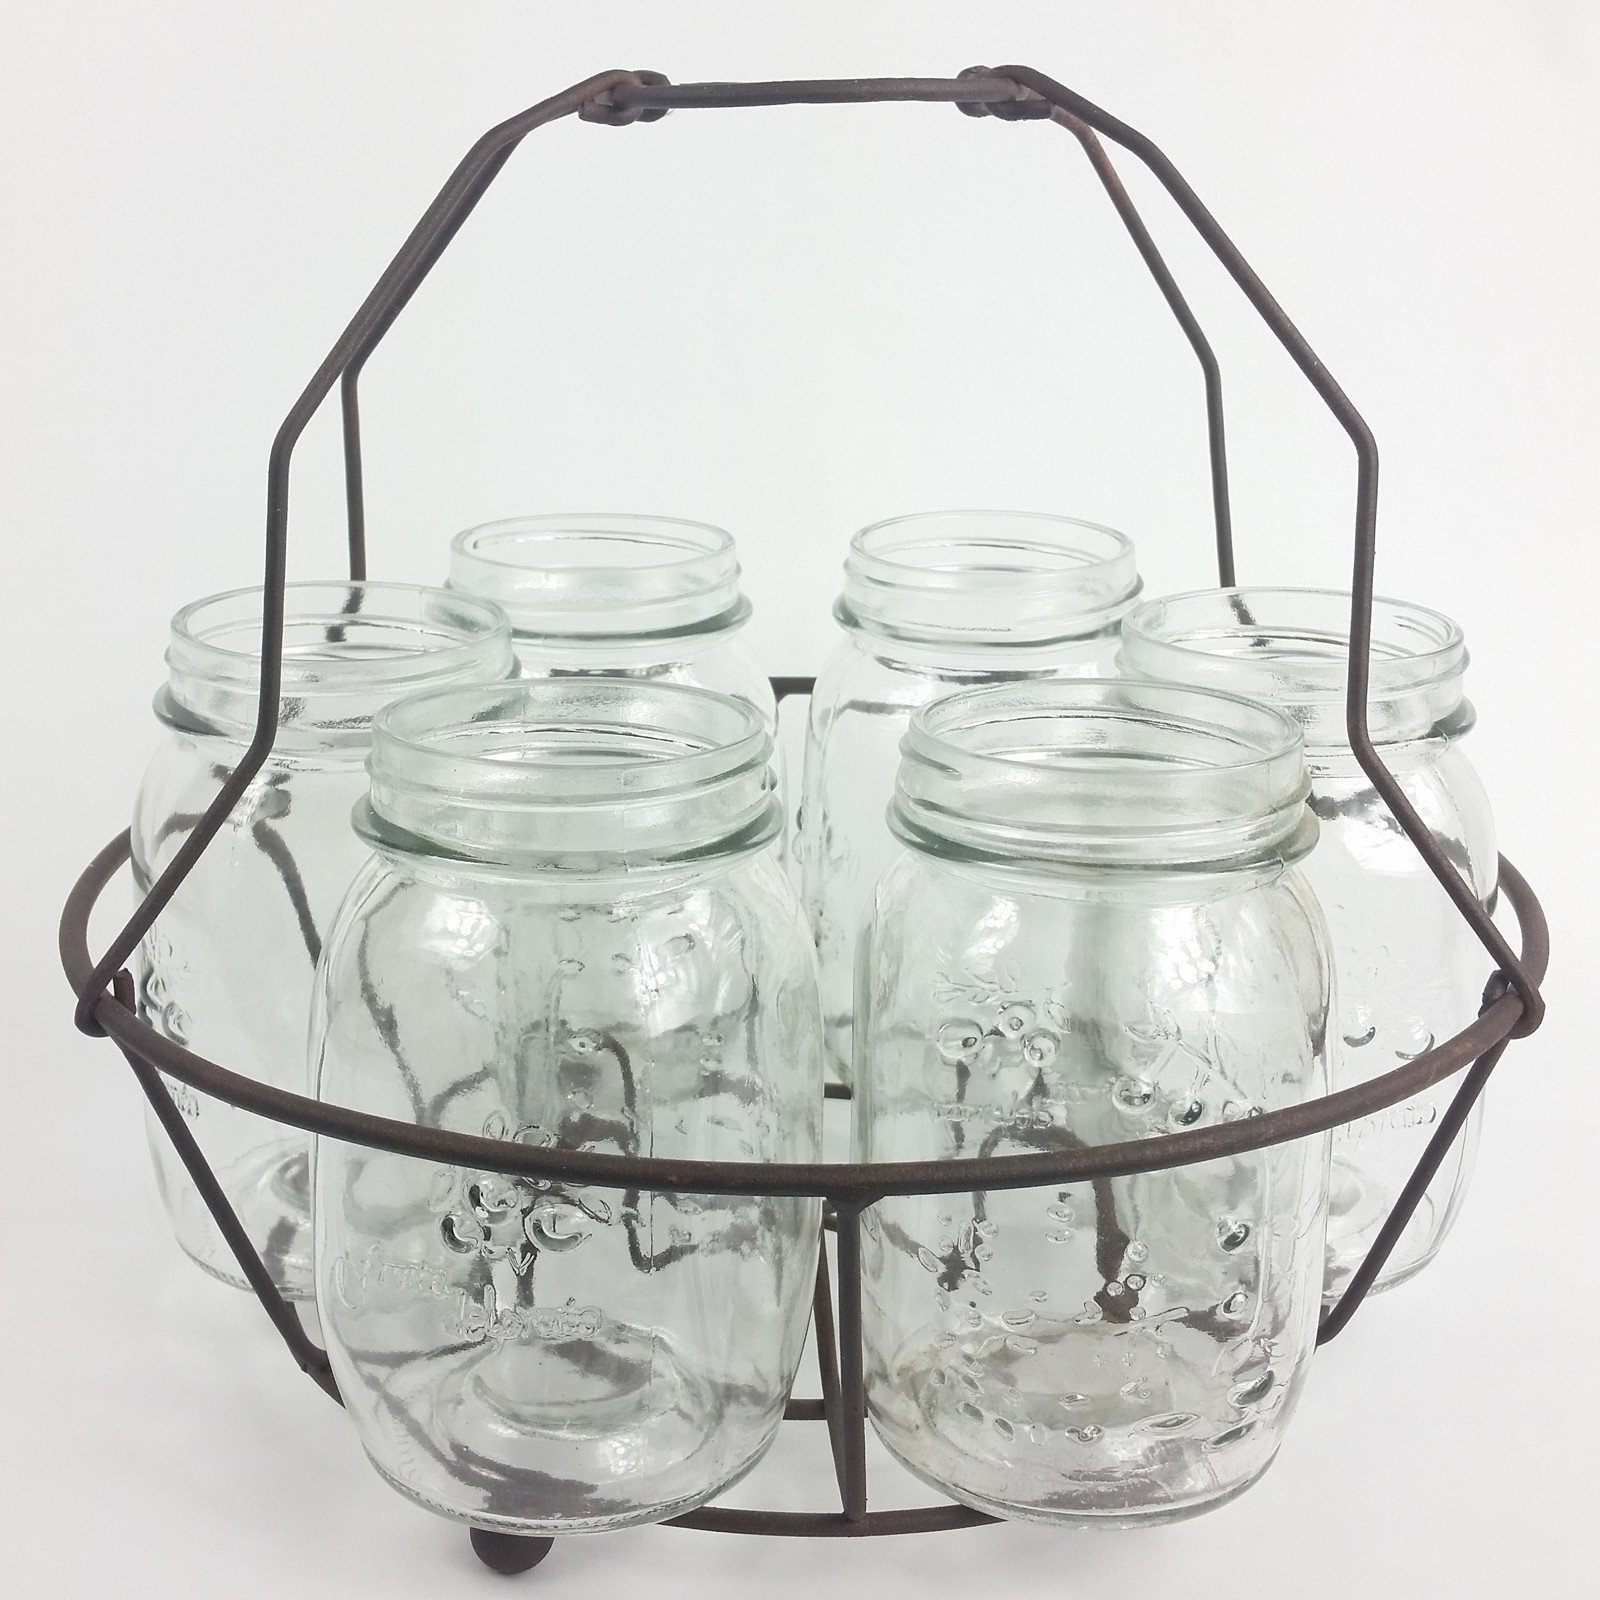 Round Metal Wire Rack Patio Picnic Caddy with Glass Drinking Jars